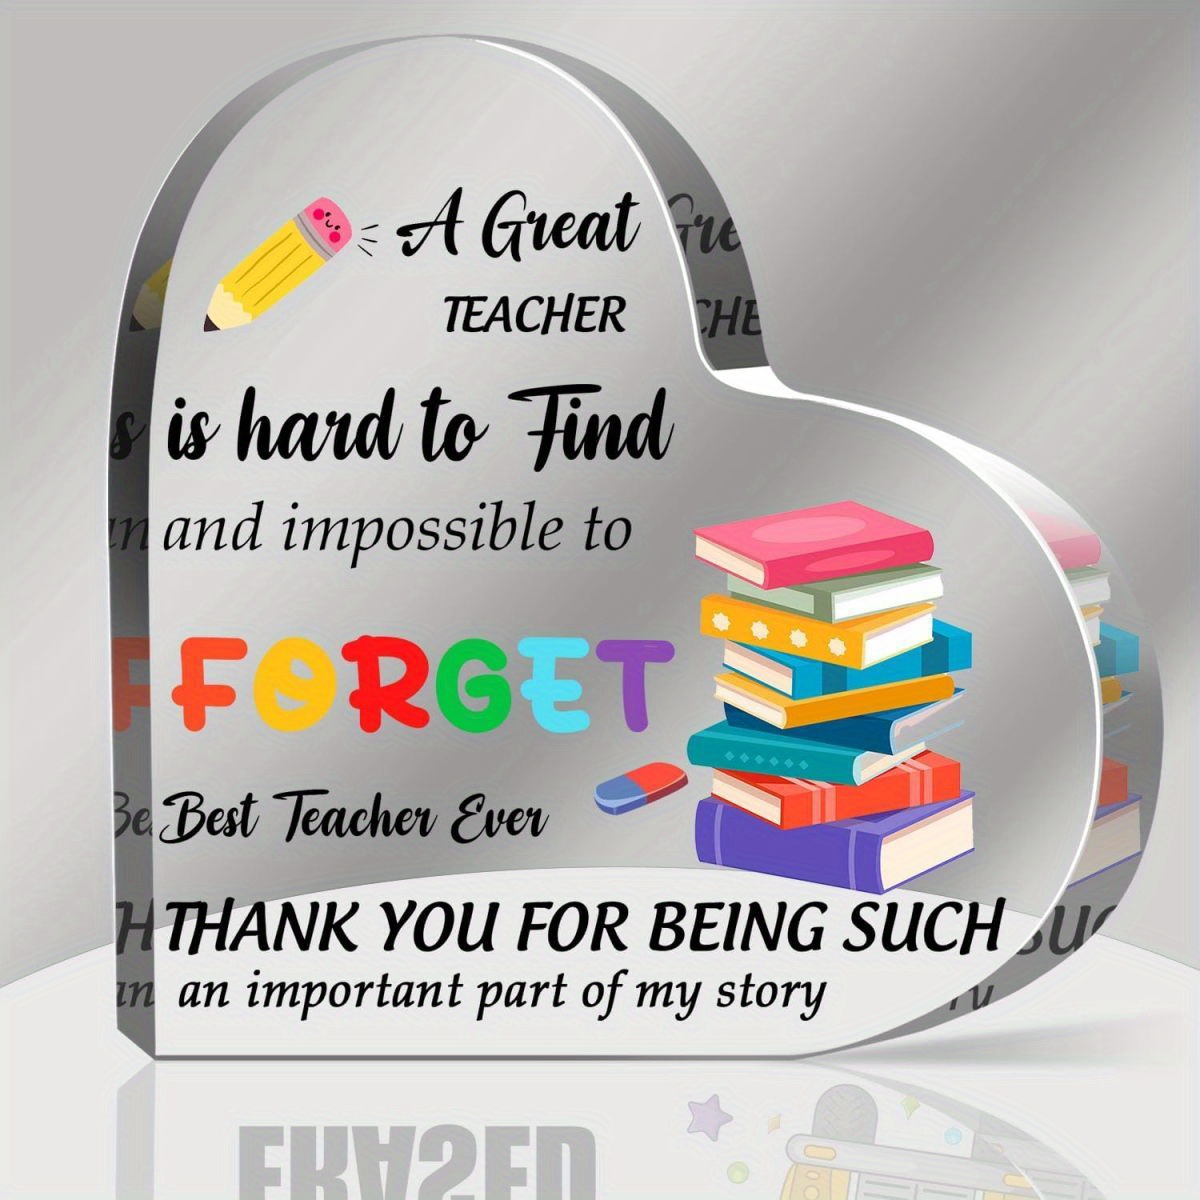 

1pc Plaque, Teacher Appreciation Signs Acrylic Keepsake And Paperweight, Gift For Women Men Teacher Mentor Thank You Gift For Teachers Day Appreciation Week Teacher Birthday Gift(great Teacher)